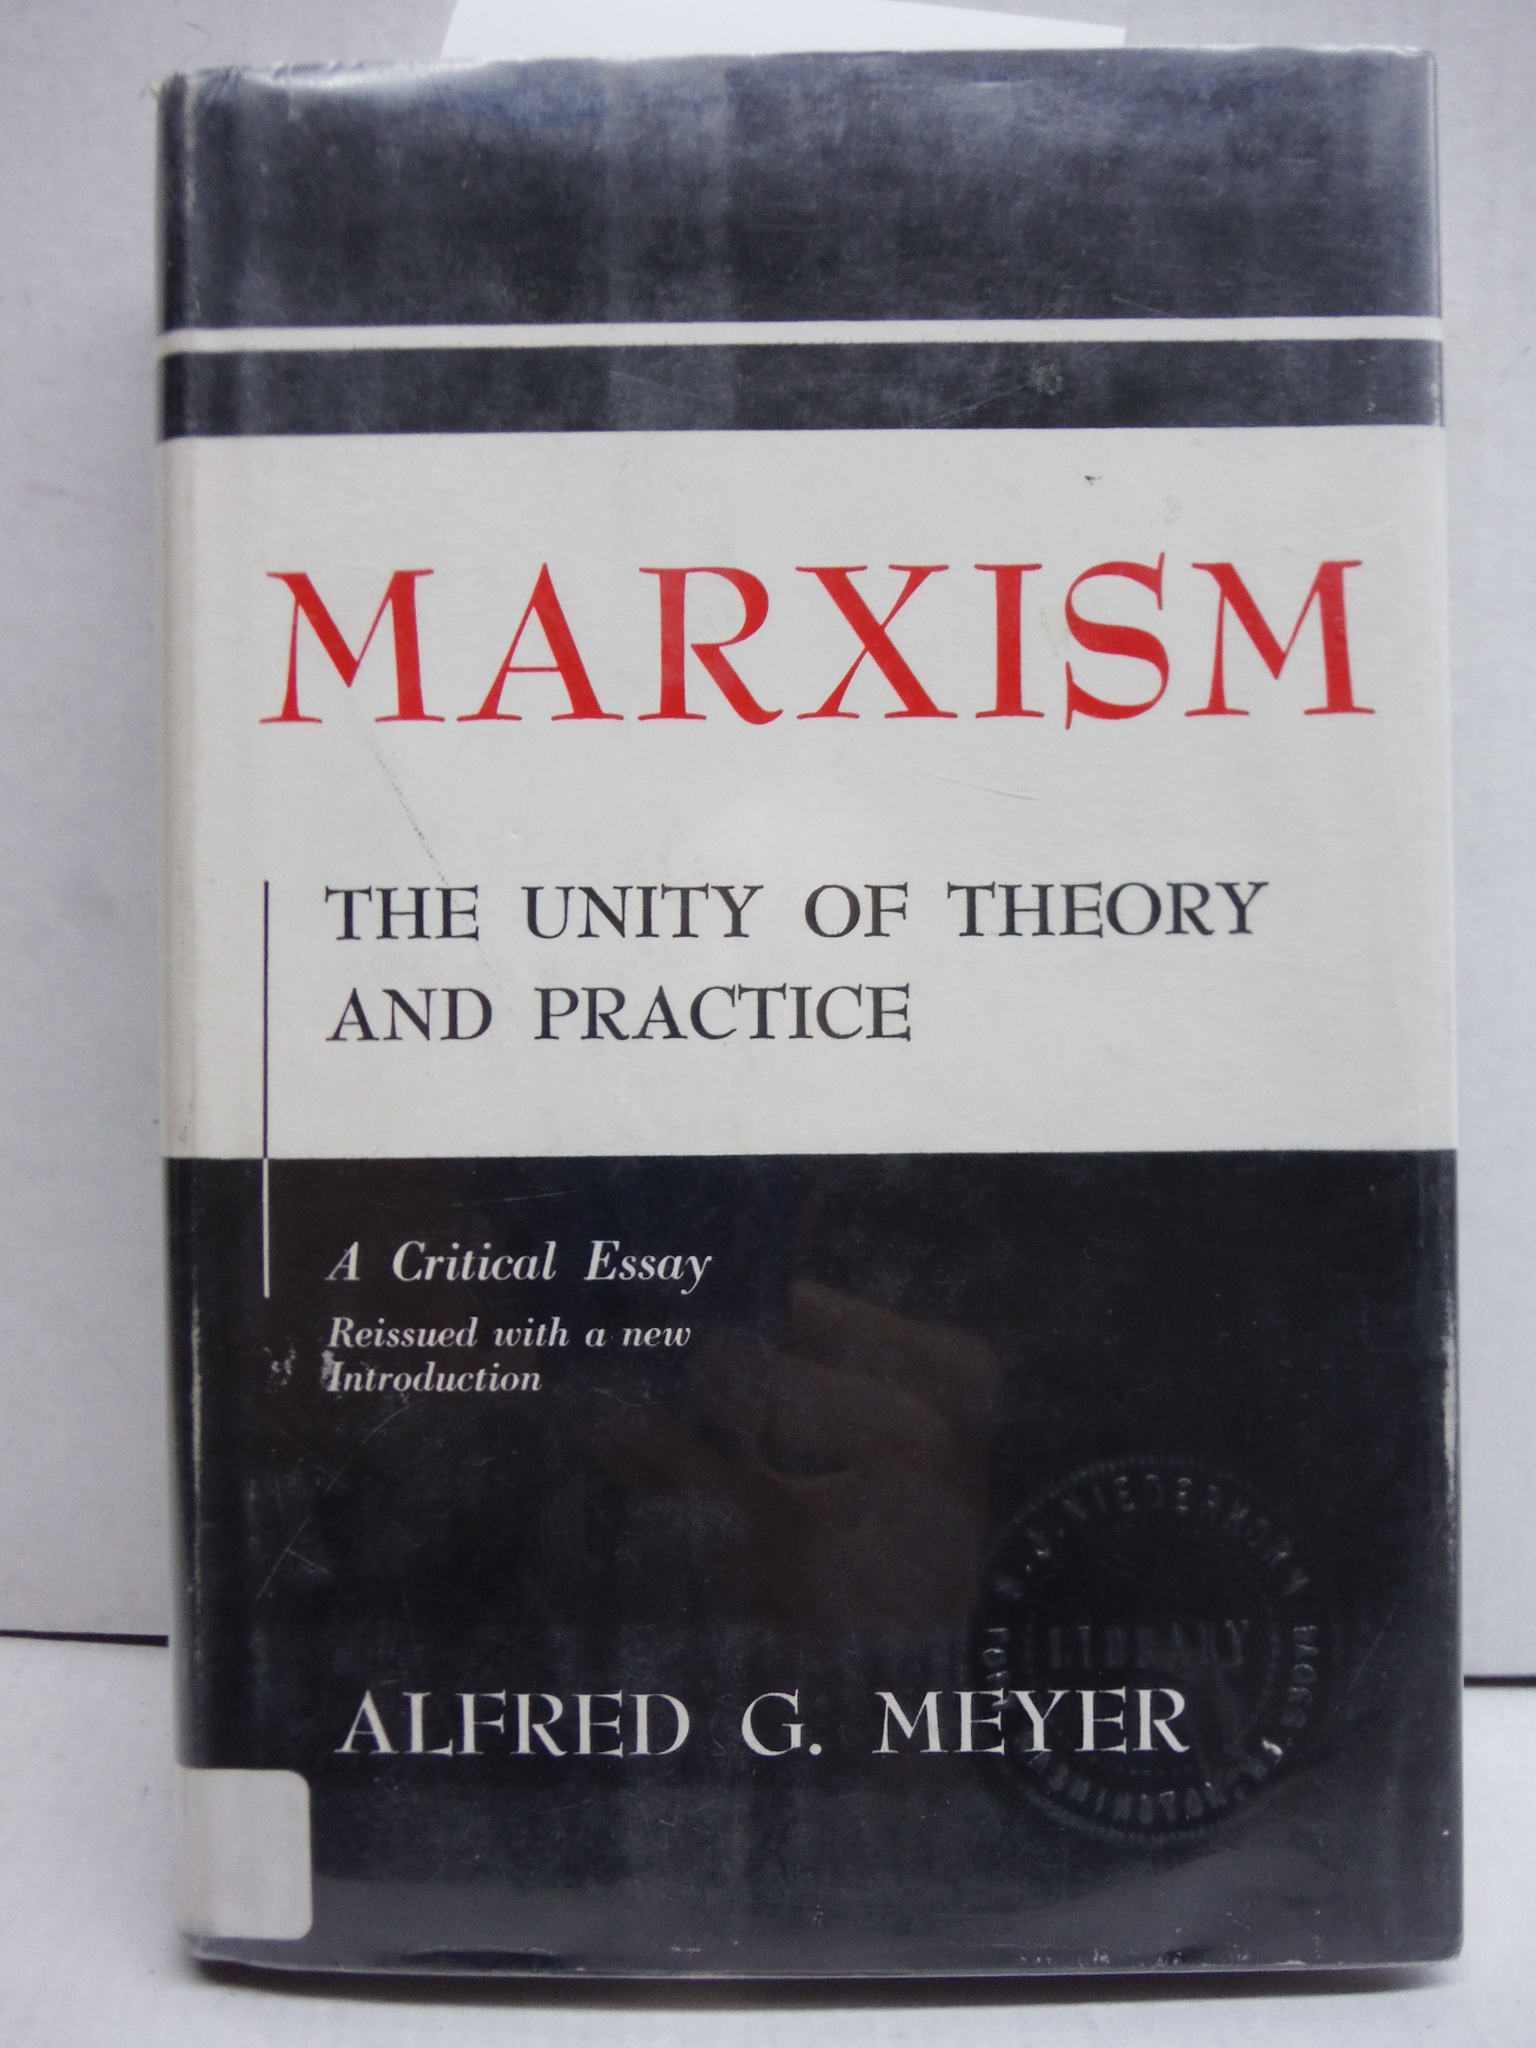 Marxism: The Unity of Theory and Practice - A Critical Essay